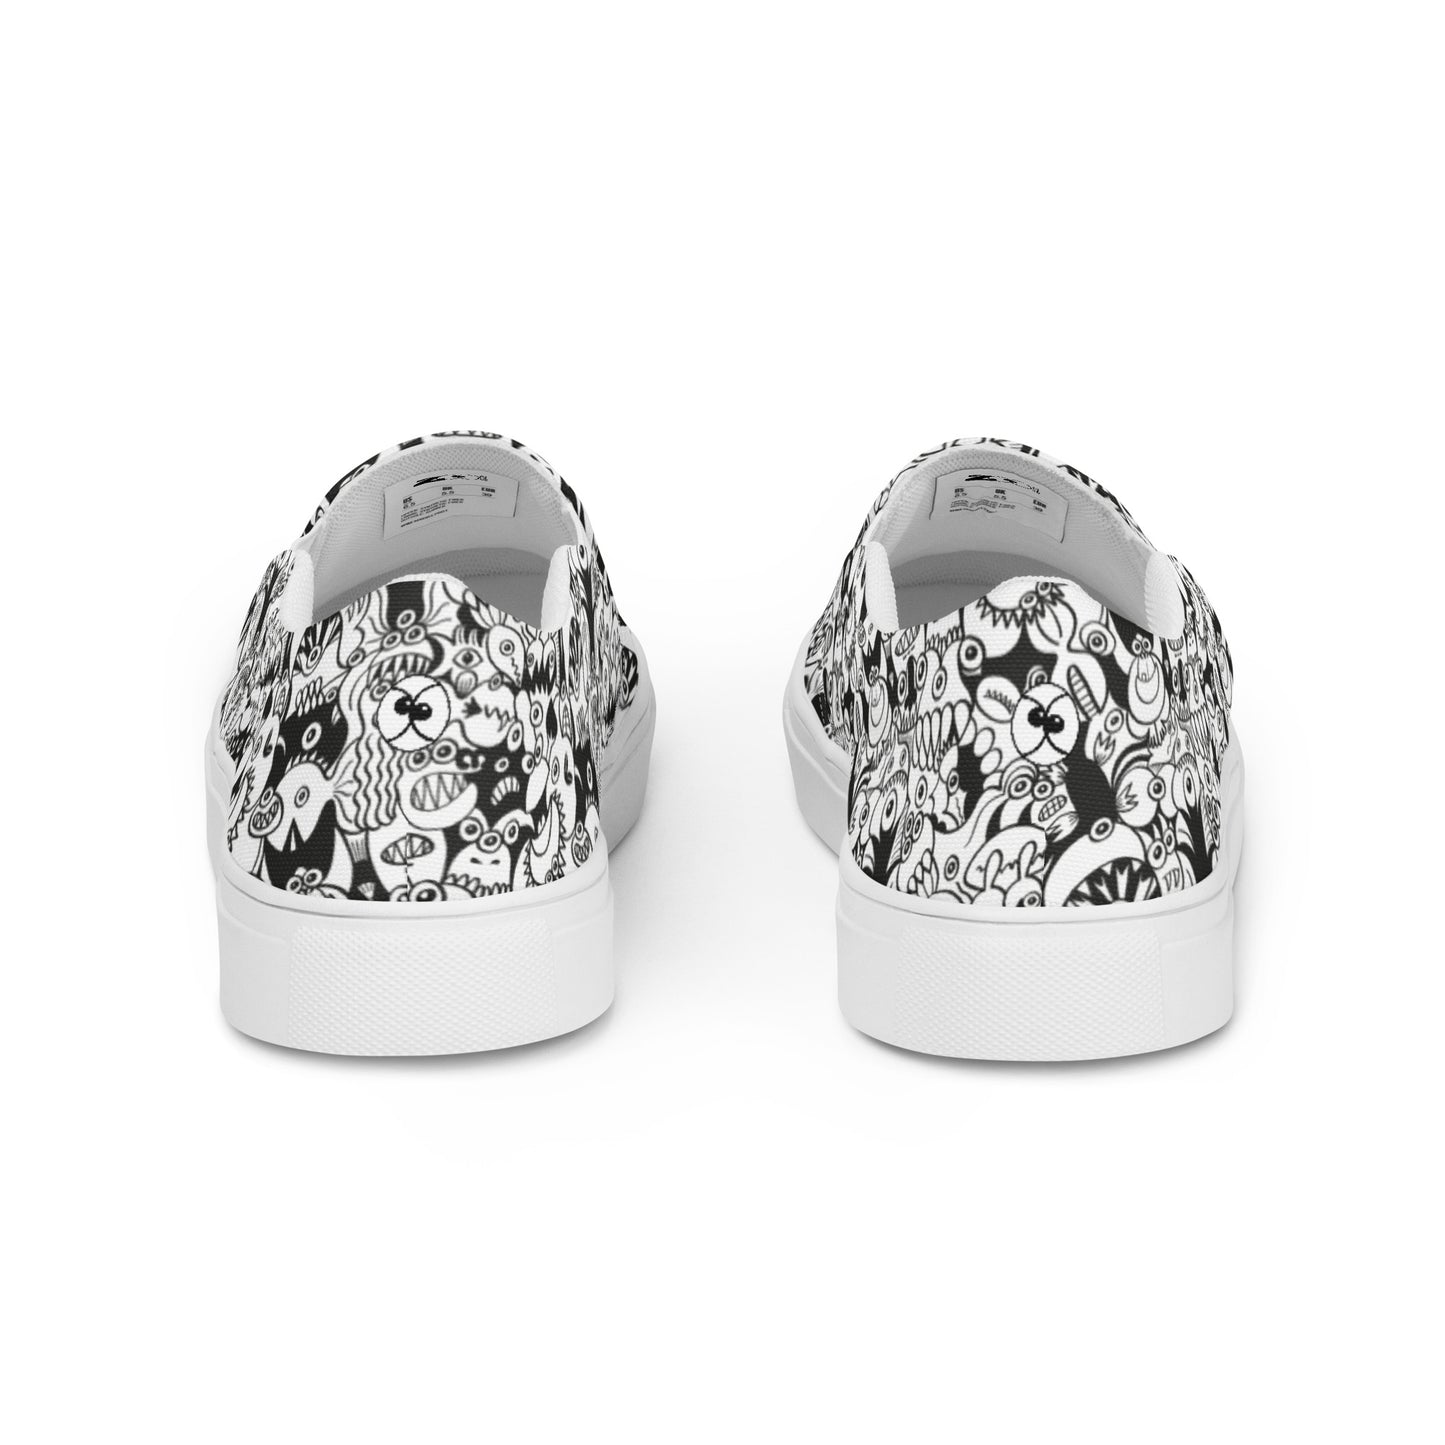 Black and white cool doodles art Men’s slip-on canvas shoes. Back view